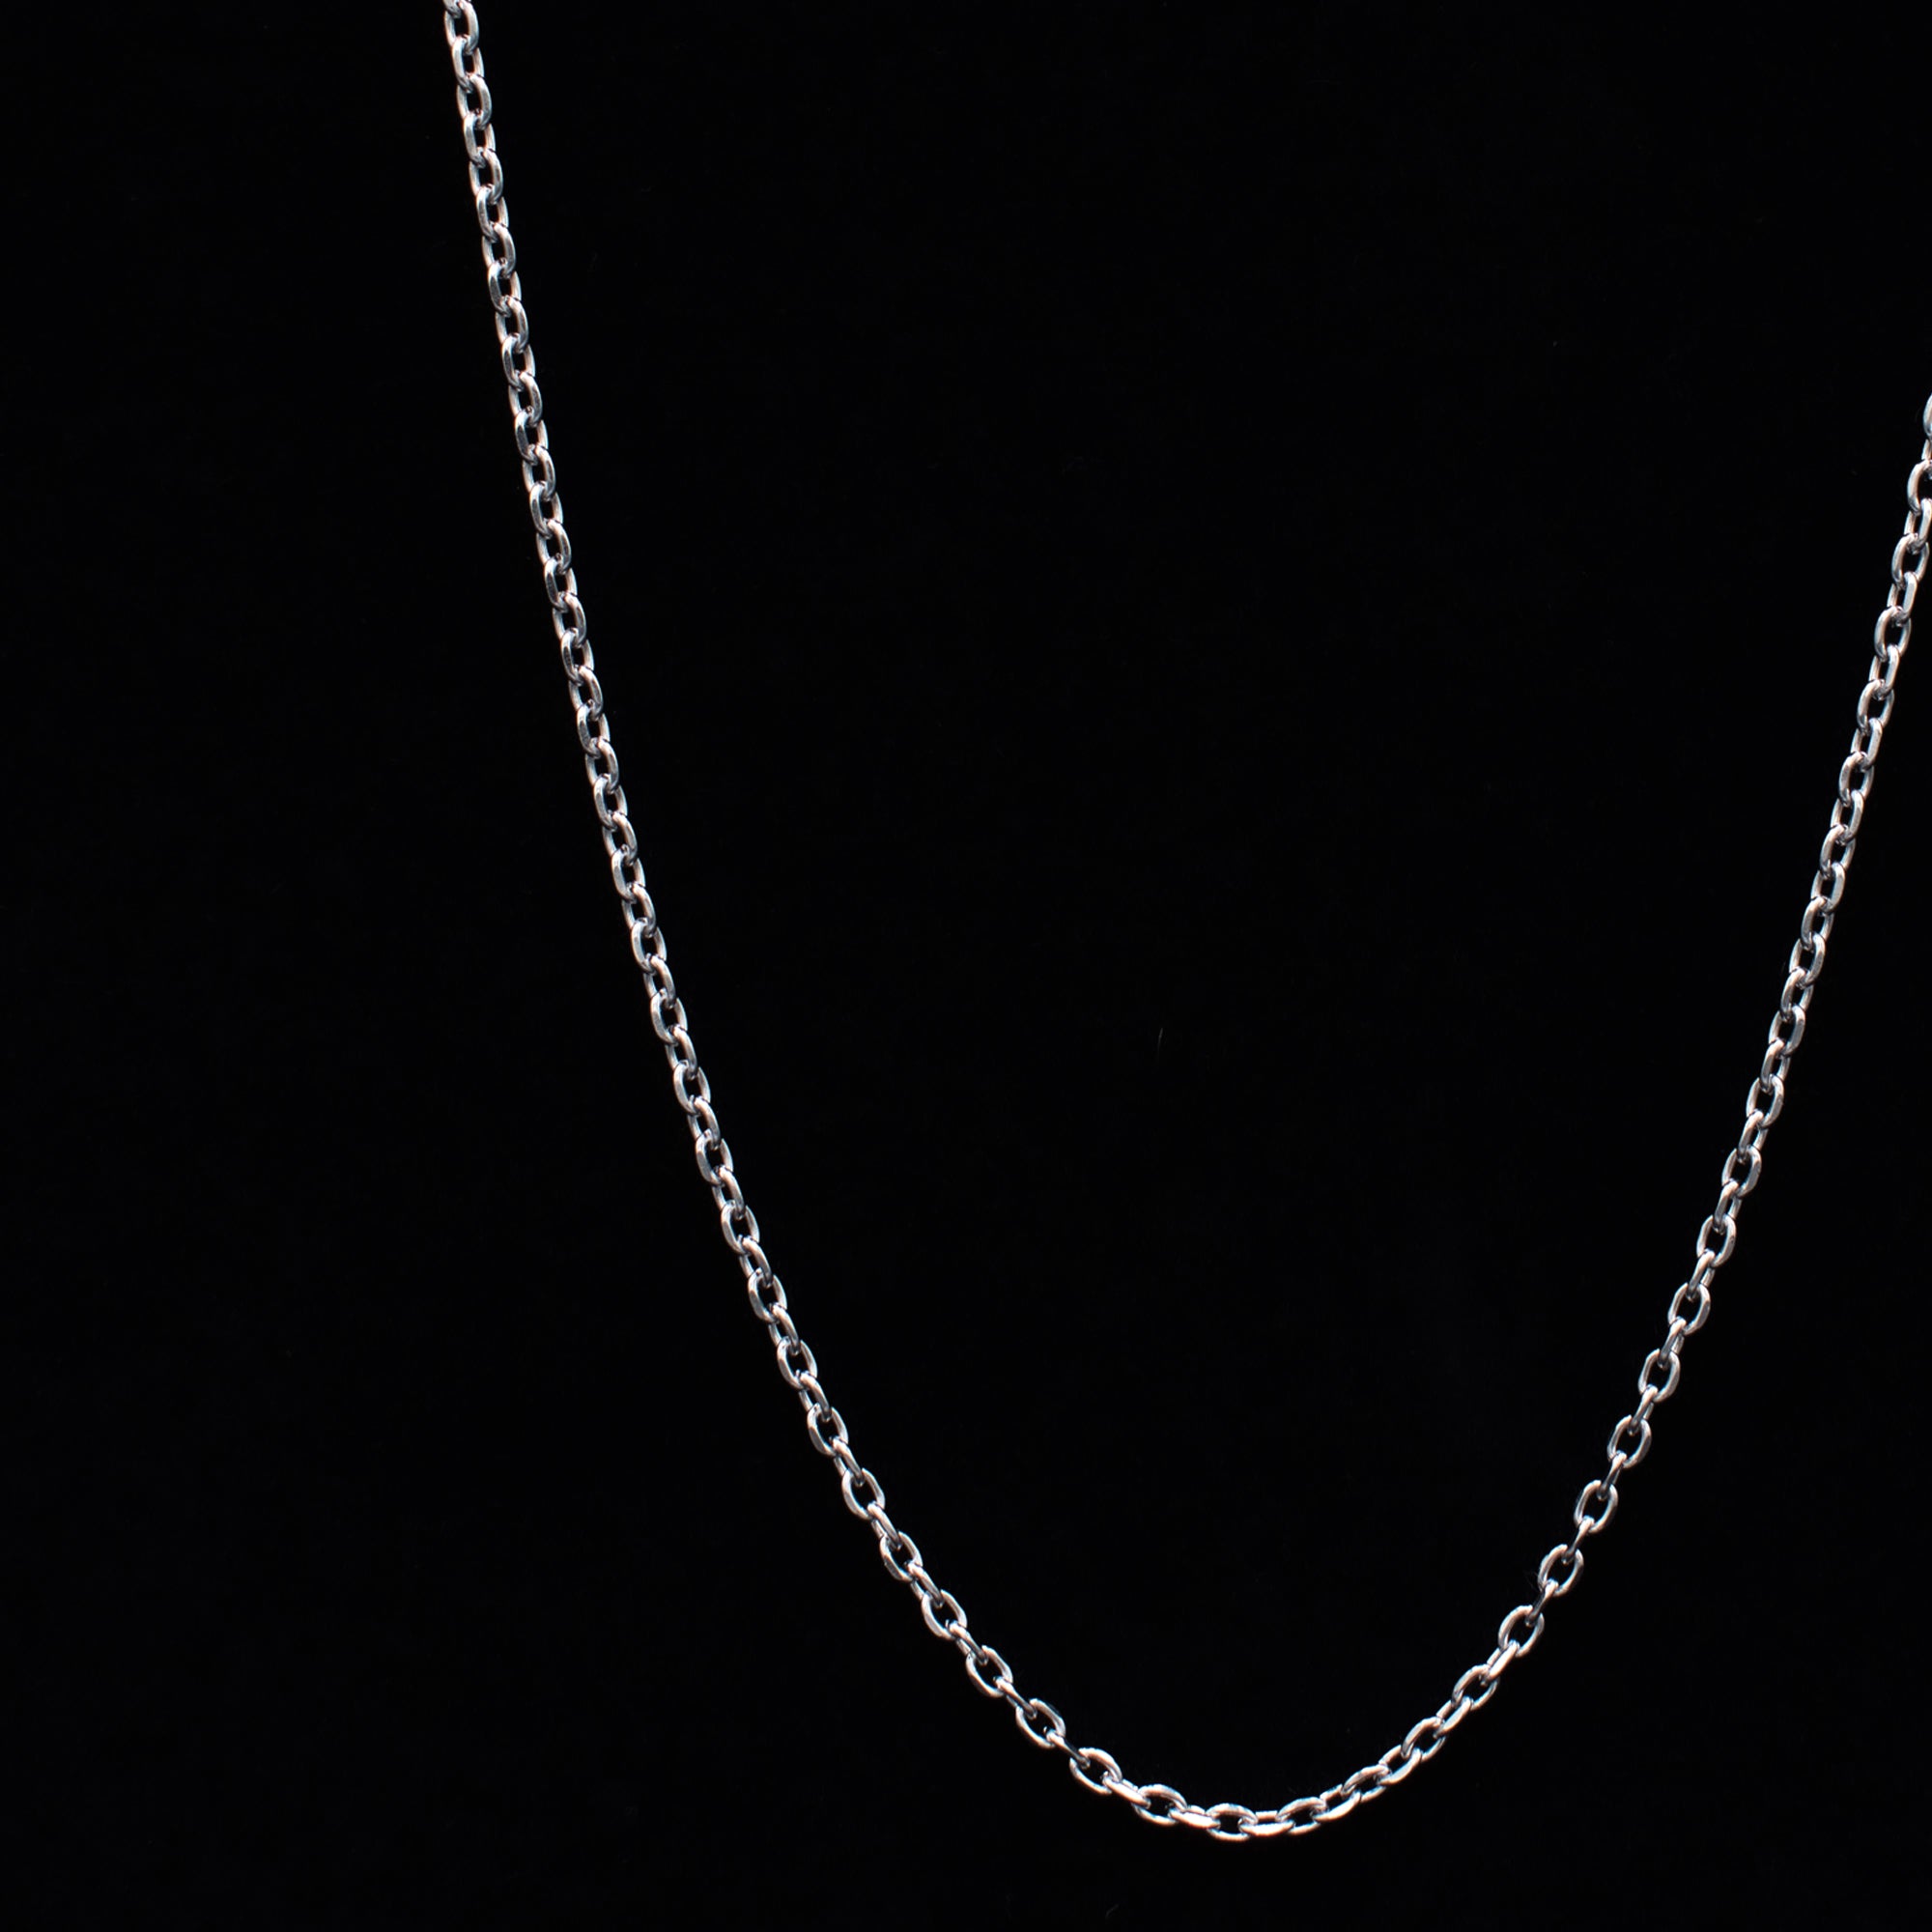 Cable Chain Necklace - (Silver) 3mm